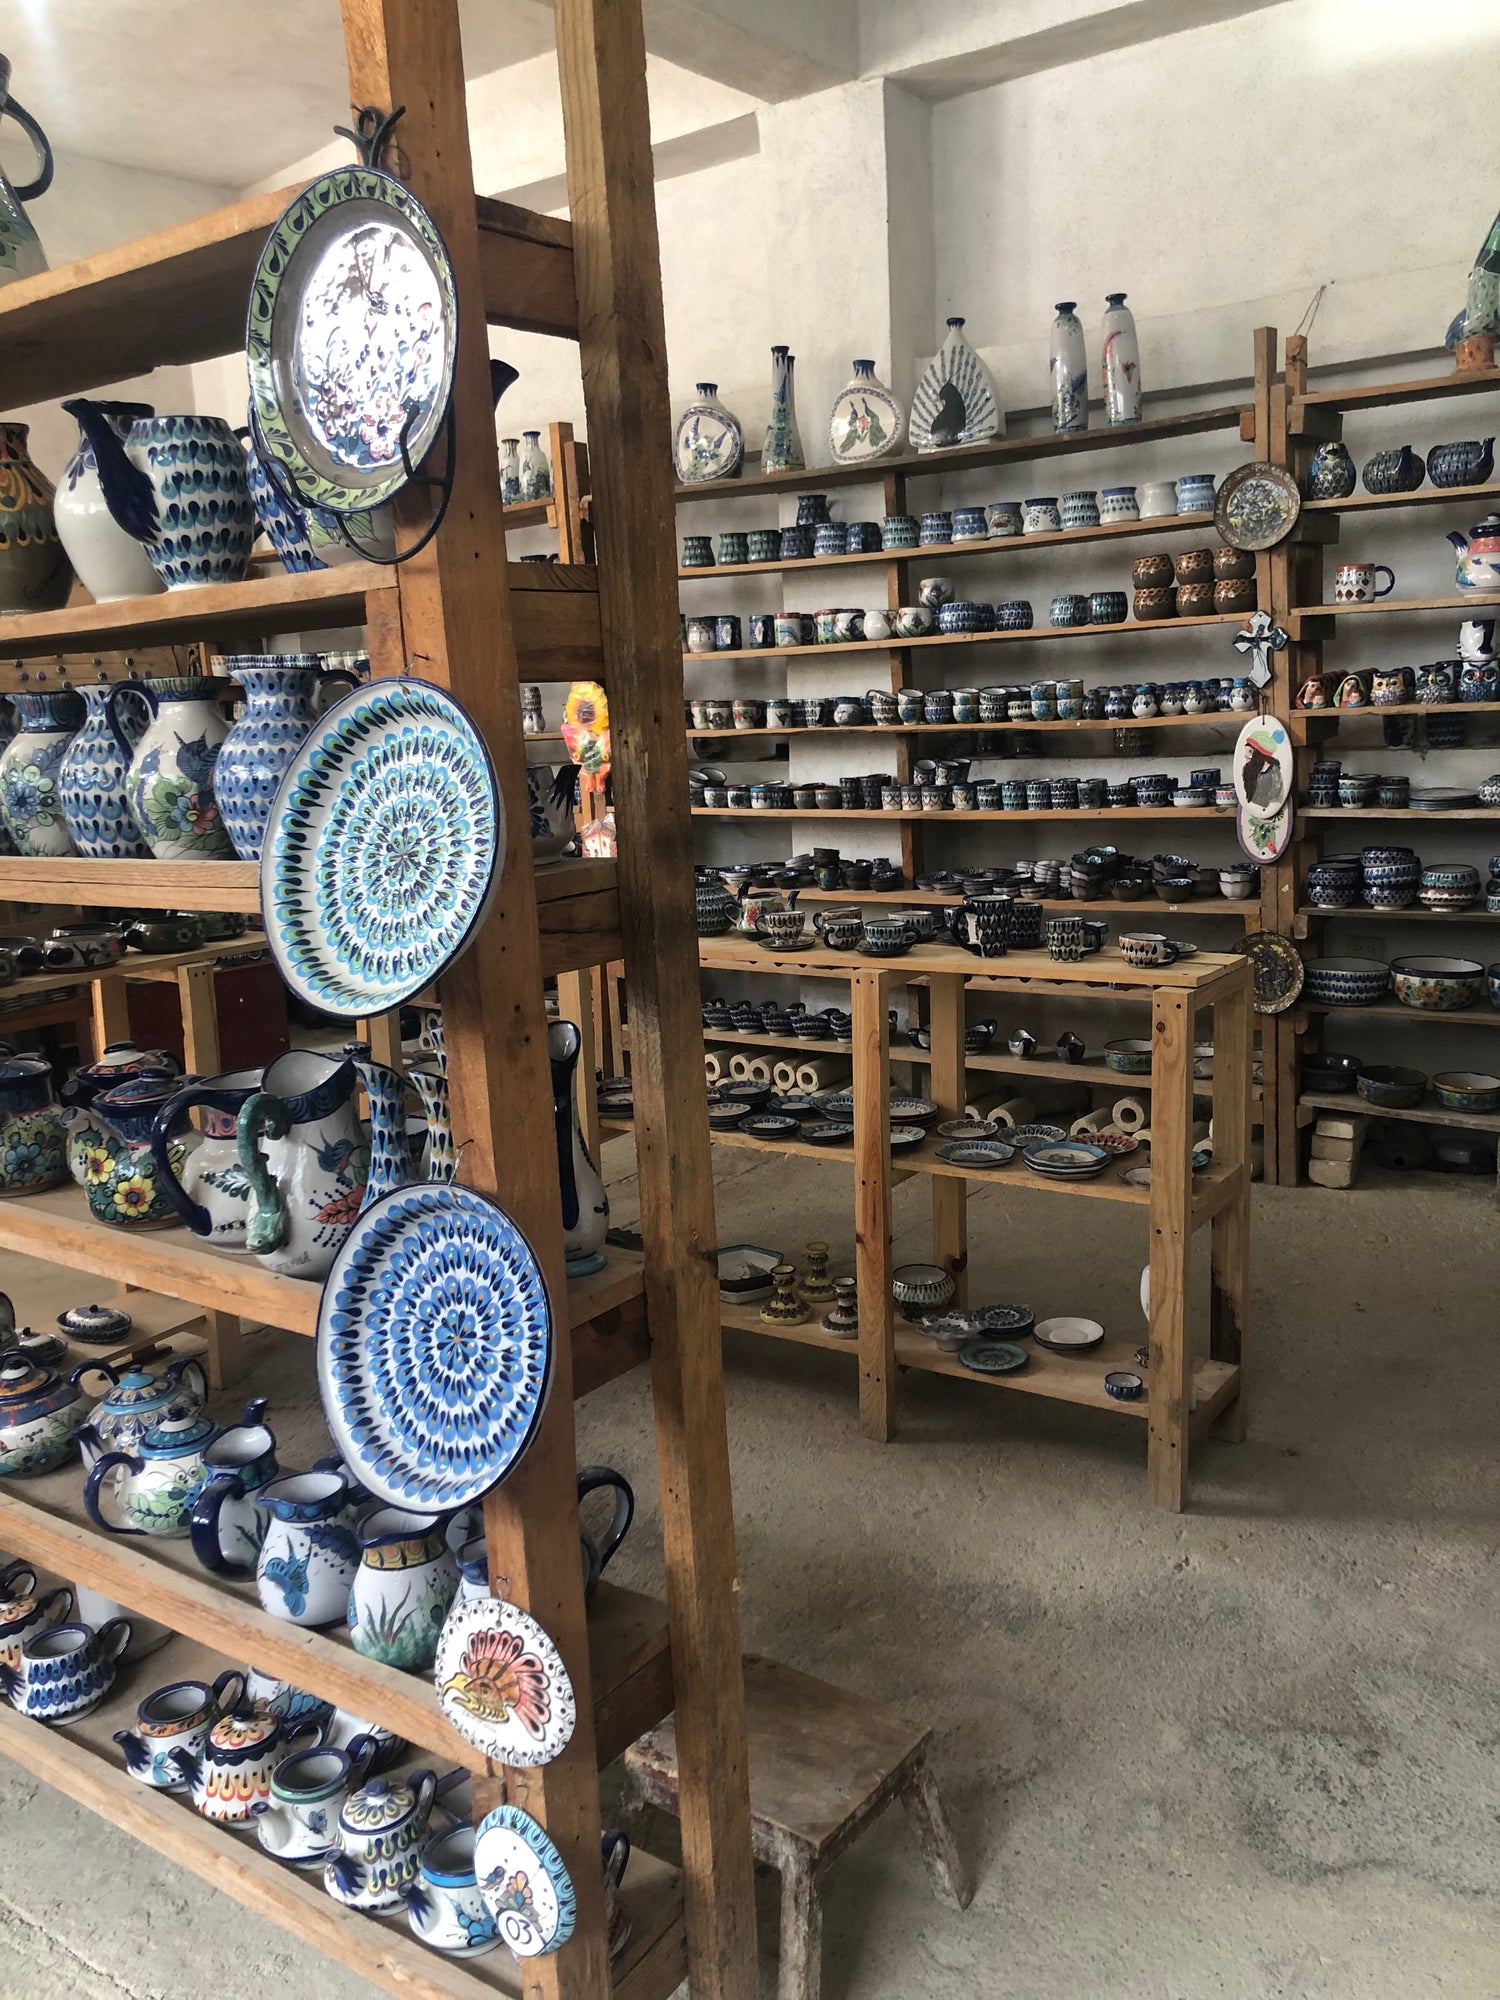 CERAMICA PALOPA MULTICOLOR is a small, family-owned ceramic pottery workshop in the small town of San Antonio Palopo on the shores of Lake Atitlan in Guatemala. The potters shape, paint and glaze each piece by hand. We fell in love with their teardrop patterns and colors!